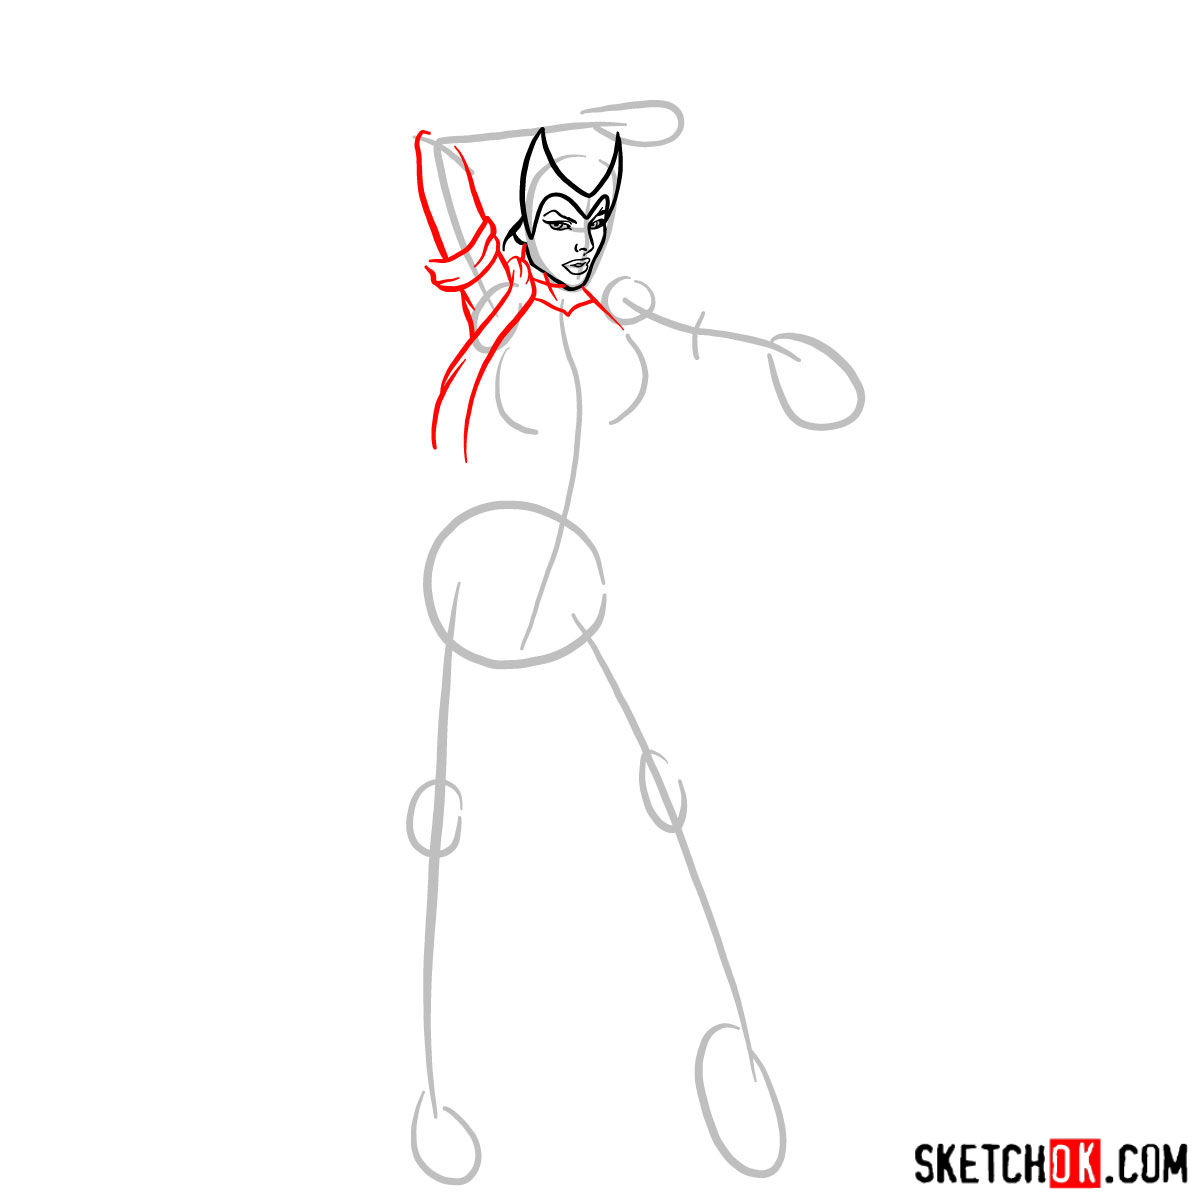 How to draw Scarlet Witch from Marvel Comics - step 05